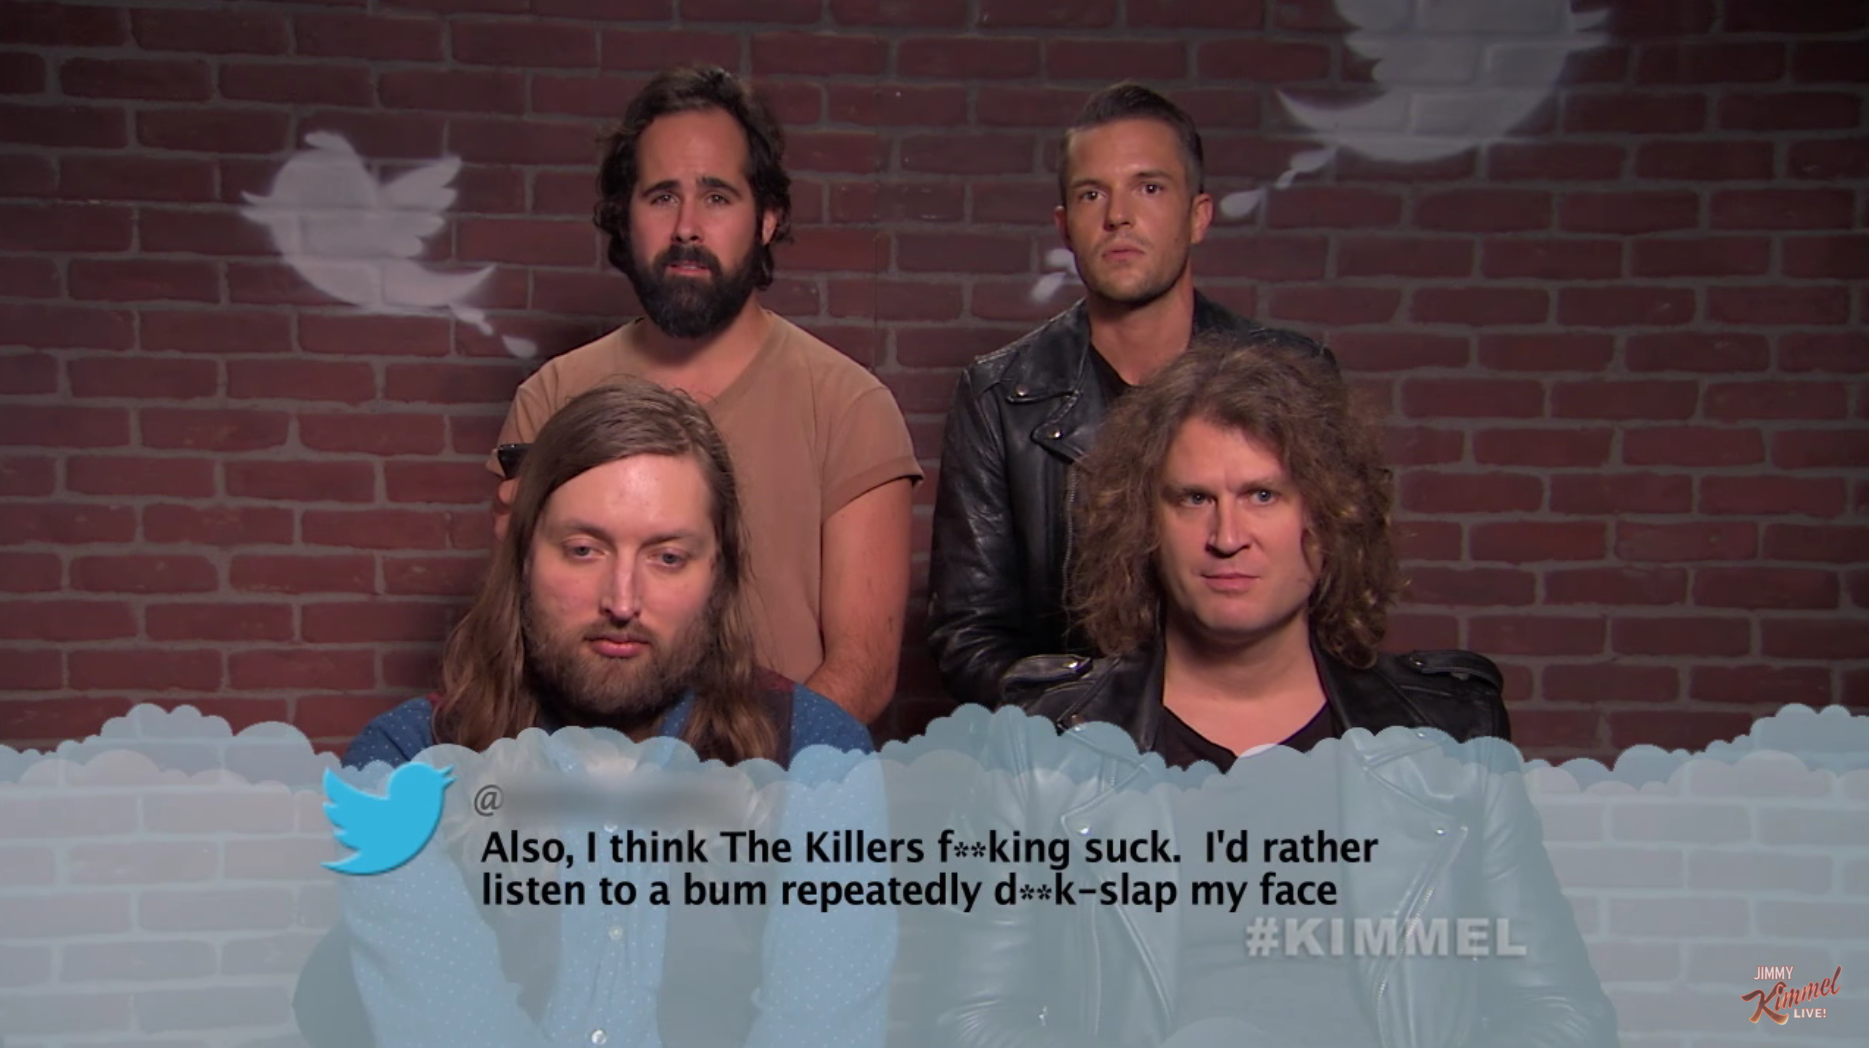 James Taylor Lionel Richie The Killers And More Read Mean Tweets About Themselves